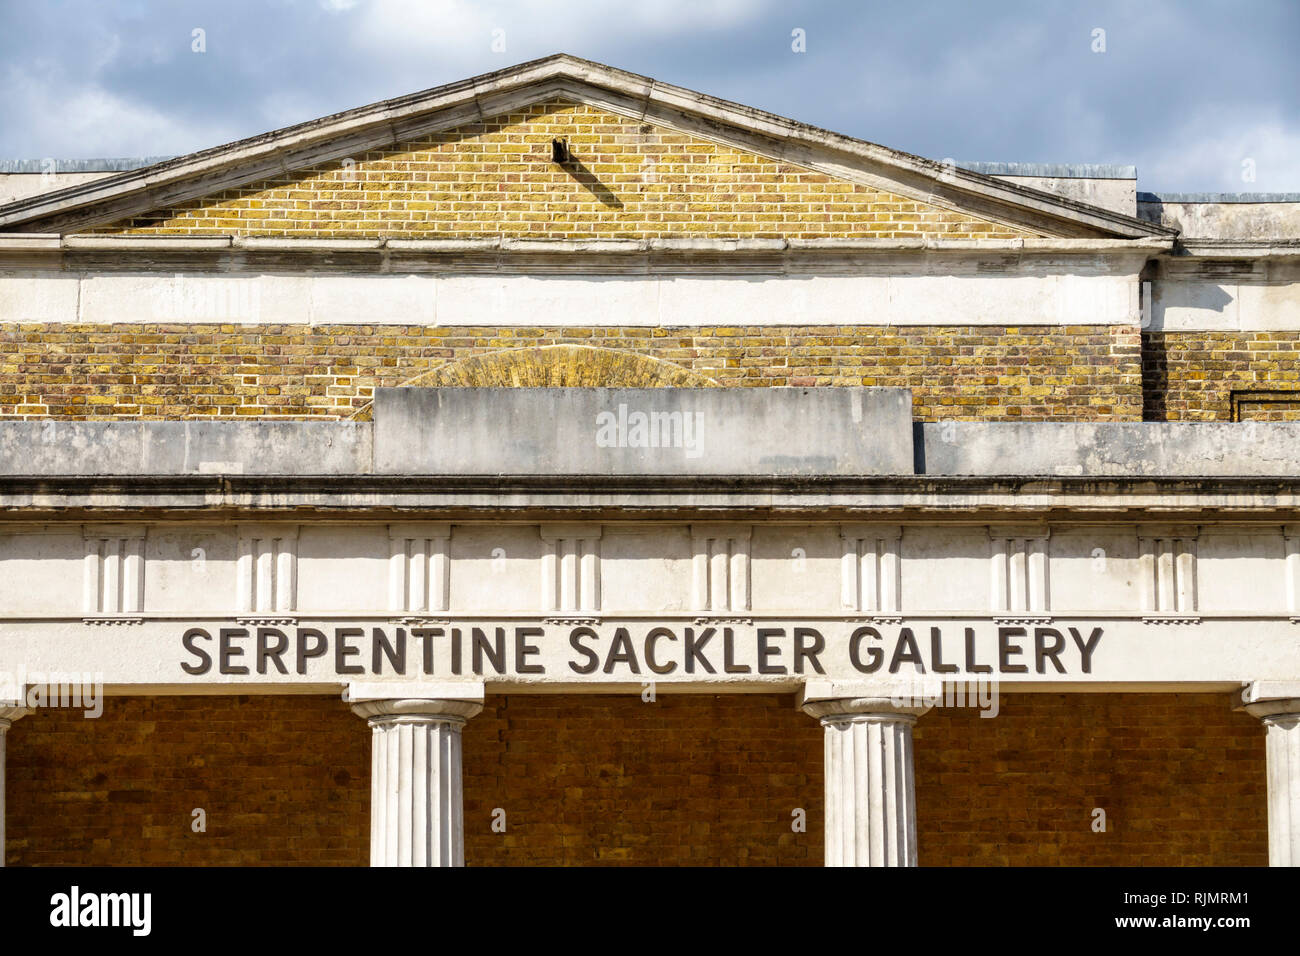 United Kingdom Great Britain England London Hyde Park public park Serpentine Sackler Gallery art gallery museum building exterior sightseeing v Stock Photo